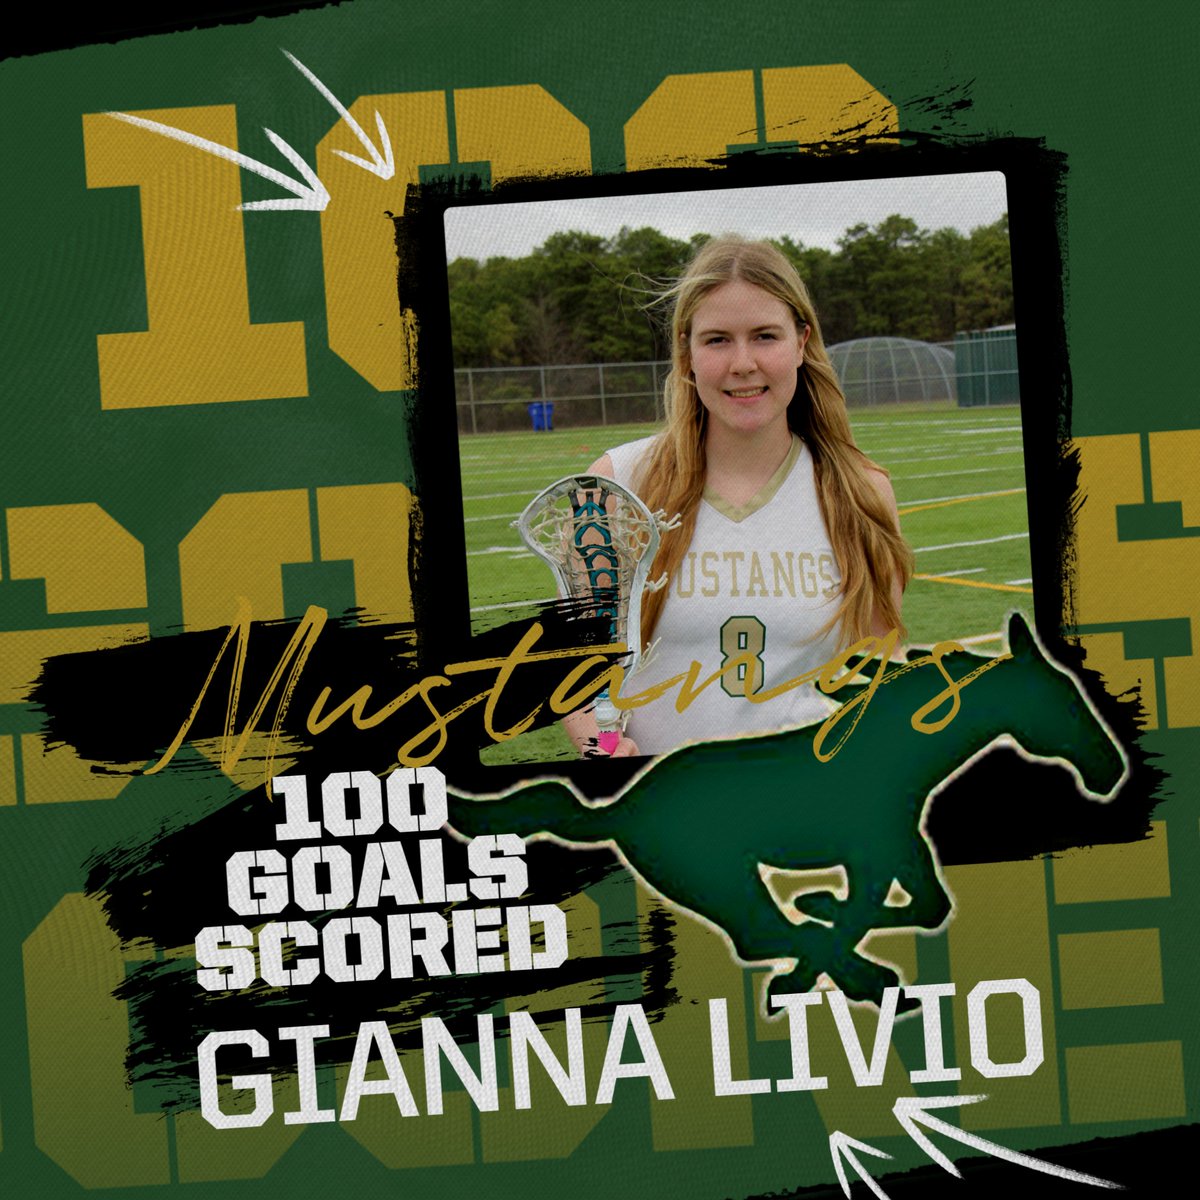 Added @giannalivioo to the 100 Goals club last night, Congrats to this incredible athlete on this accomplishment!!!! @BMSTANGSports